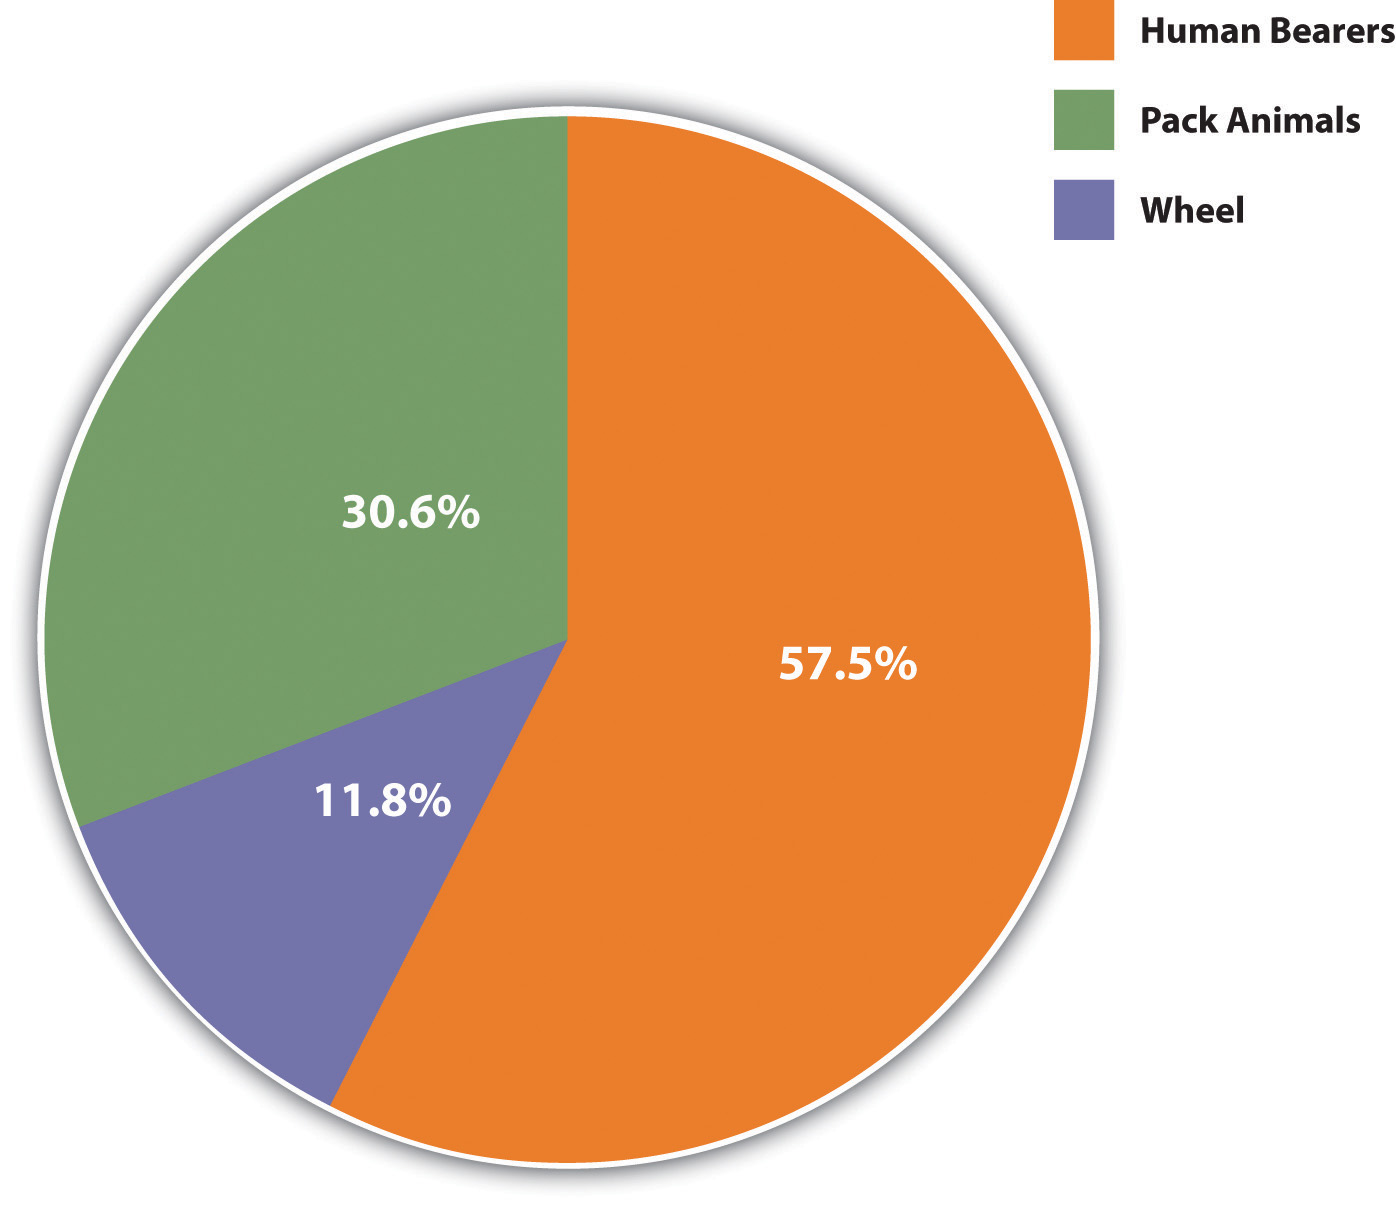 Primary means of moving heavy loads: 57.5% human bearers, 30.6% pack animals, 11.8% wheel